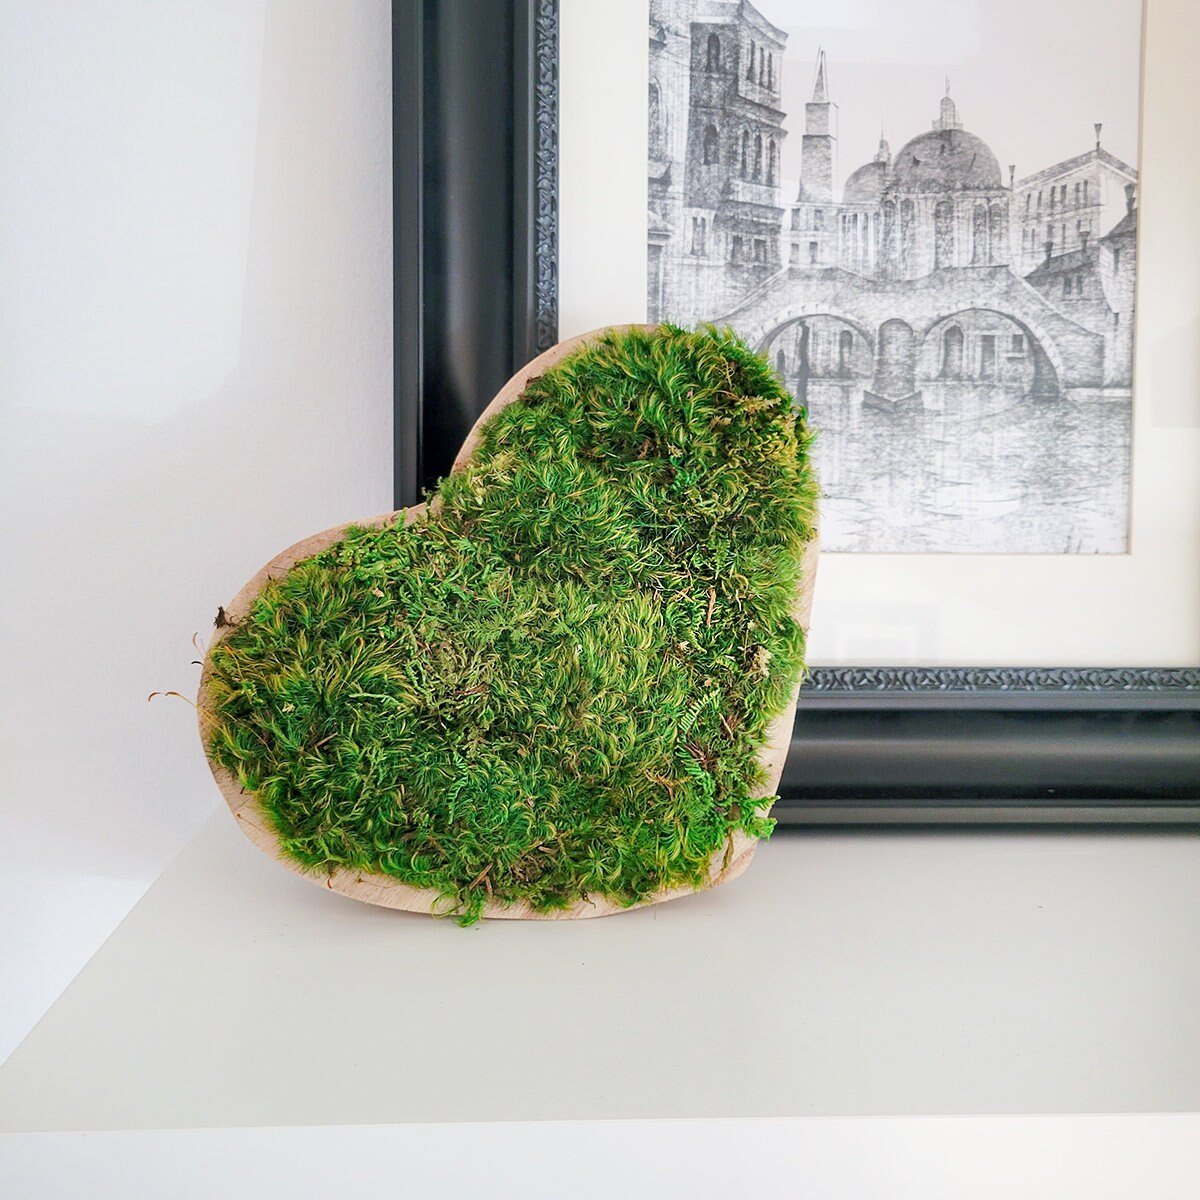 Preserved Mood Moss Heart in a wooden bowl - Mossy Moss by Olia